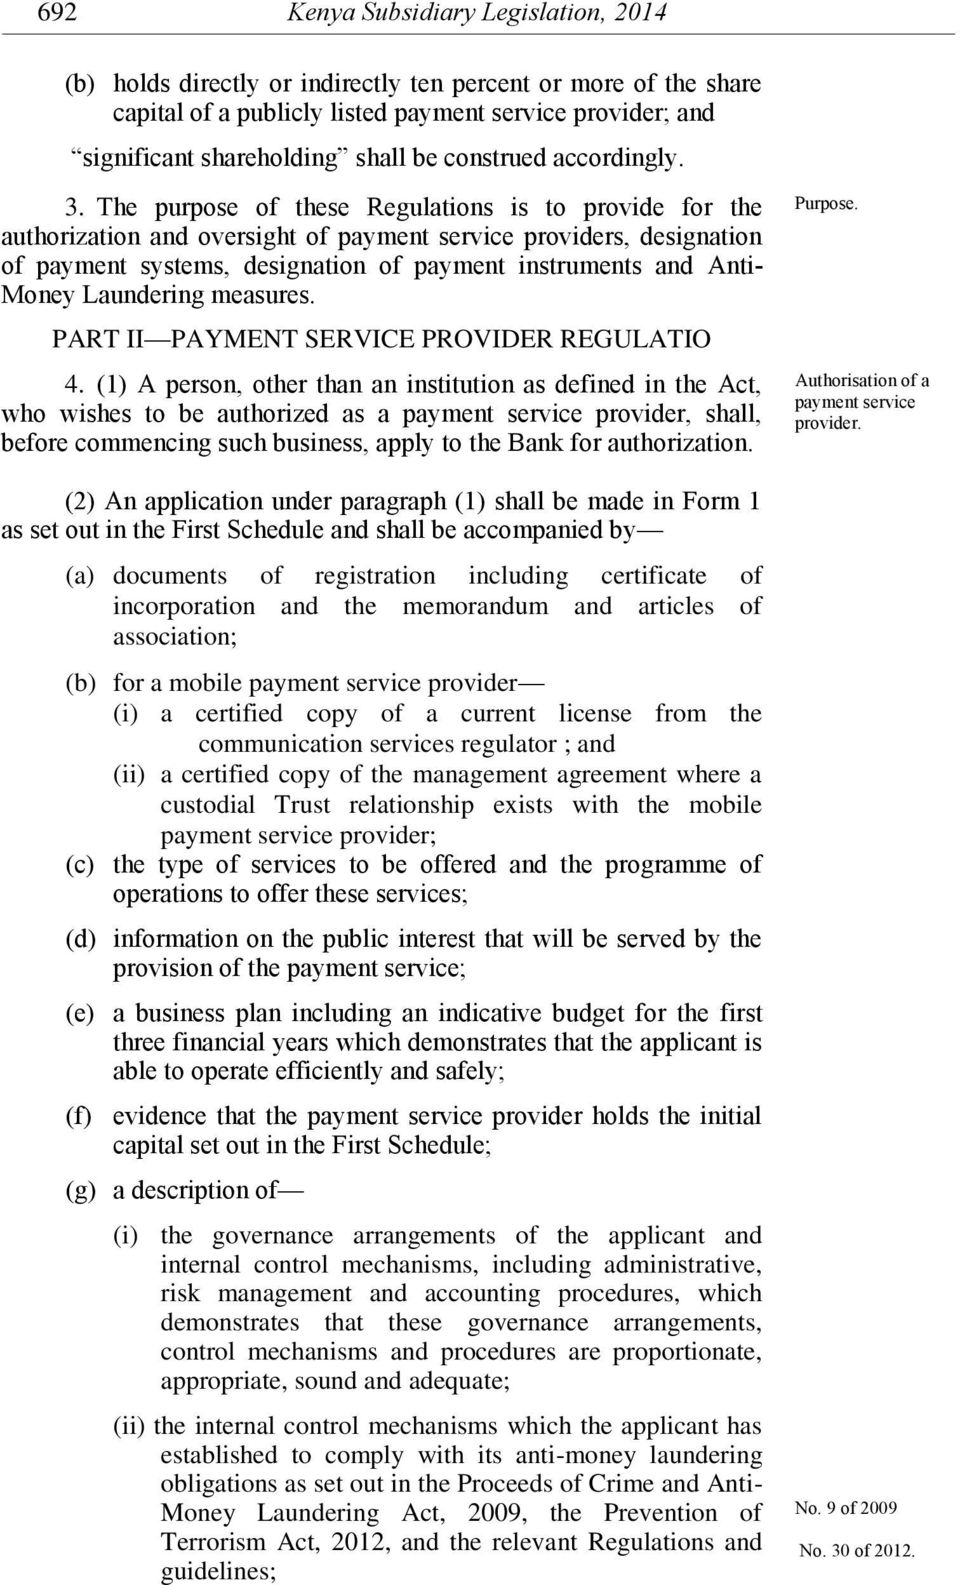 The purpose of these Regulations is to provide for the authorization and oversight of payment service providers, designation of payment systems, designation of payment instruments and Anti- Money